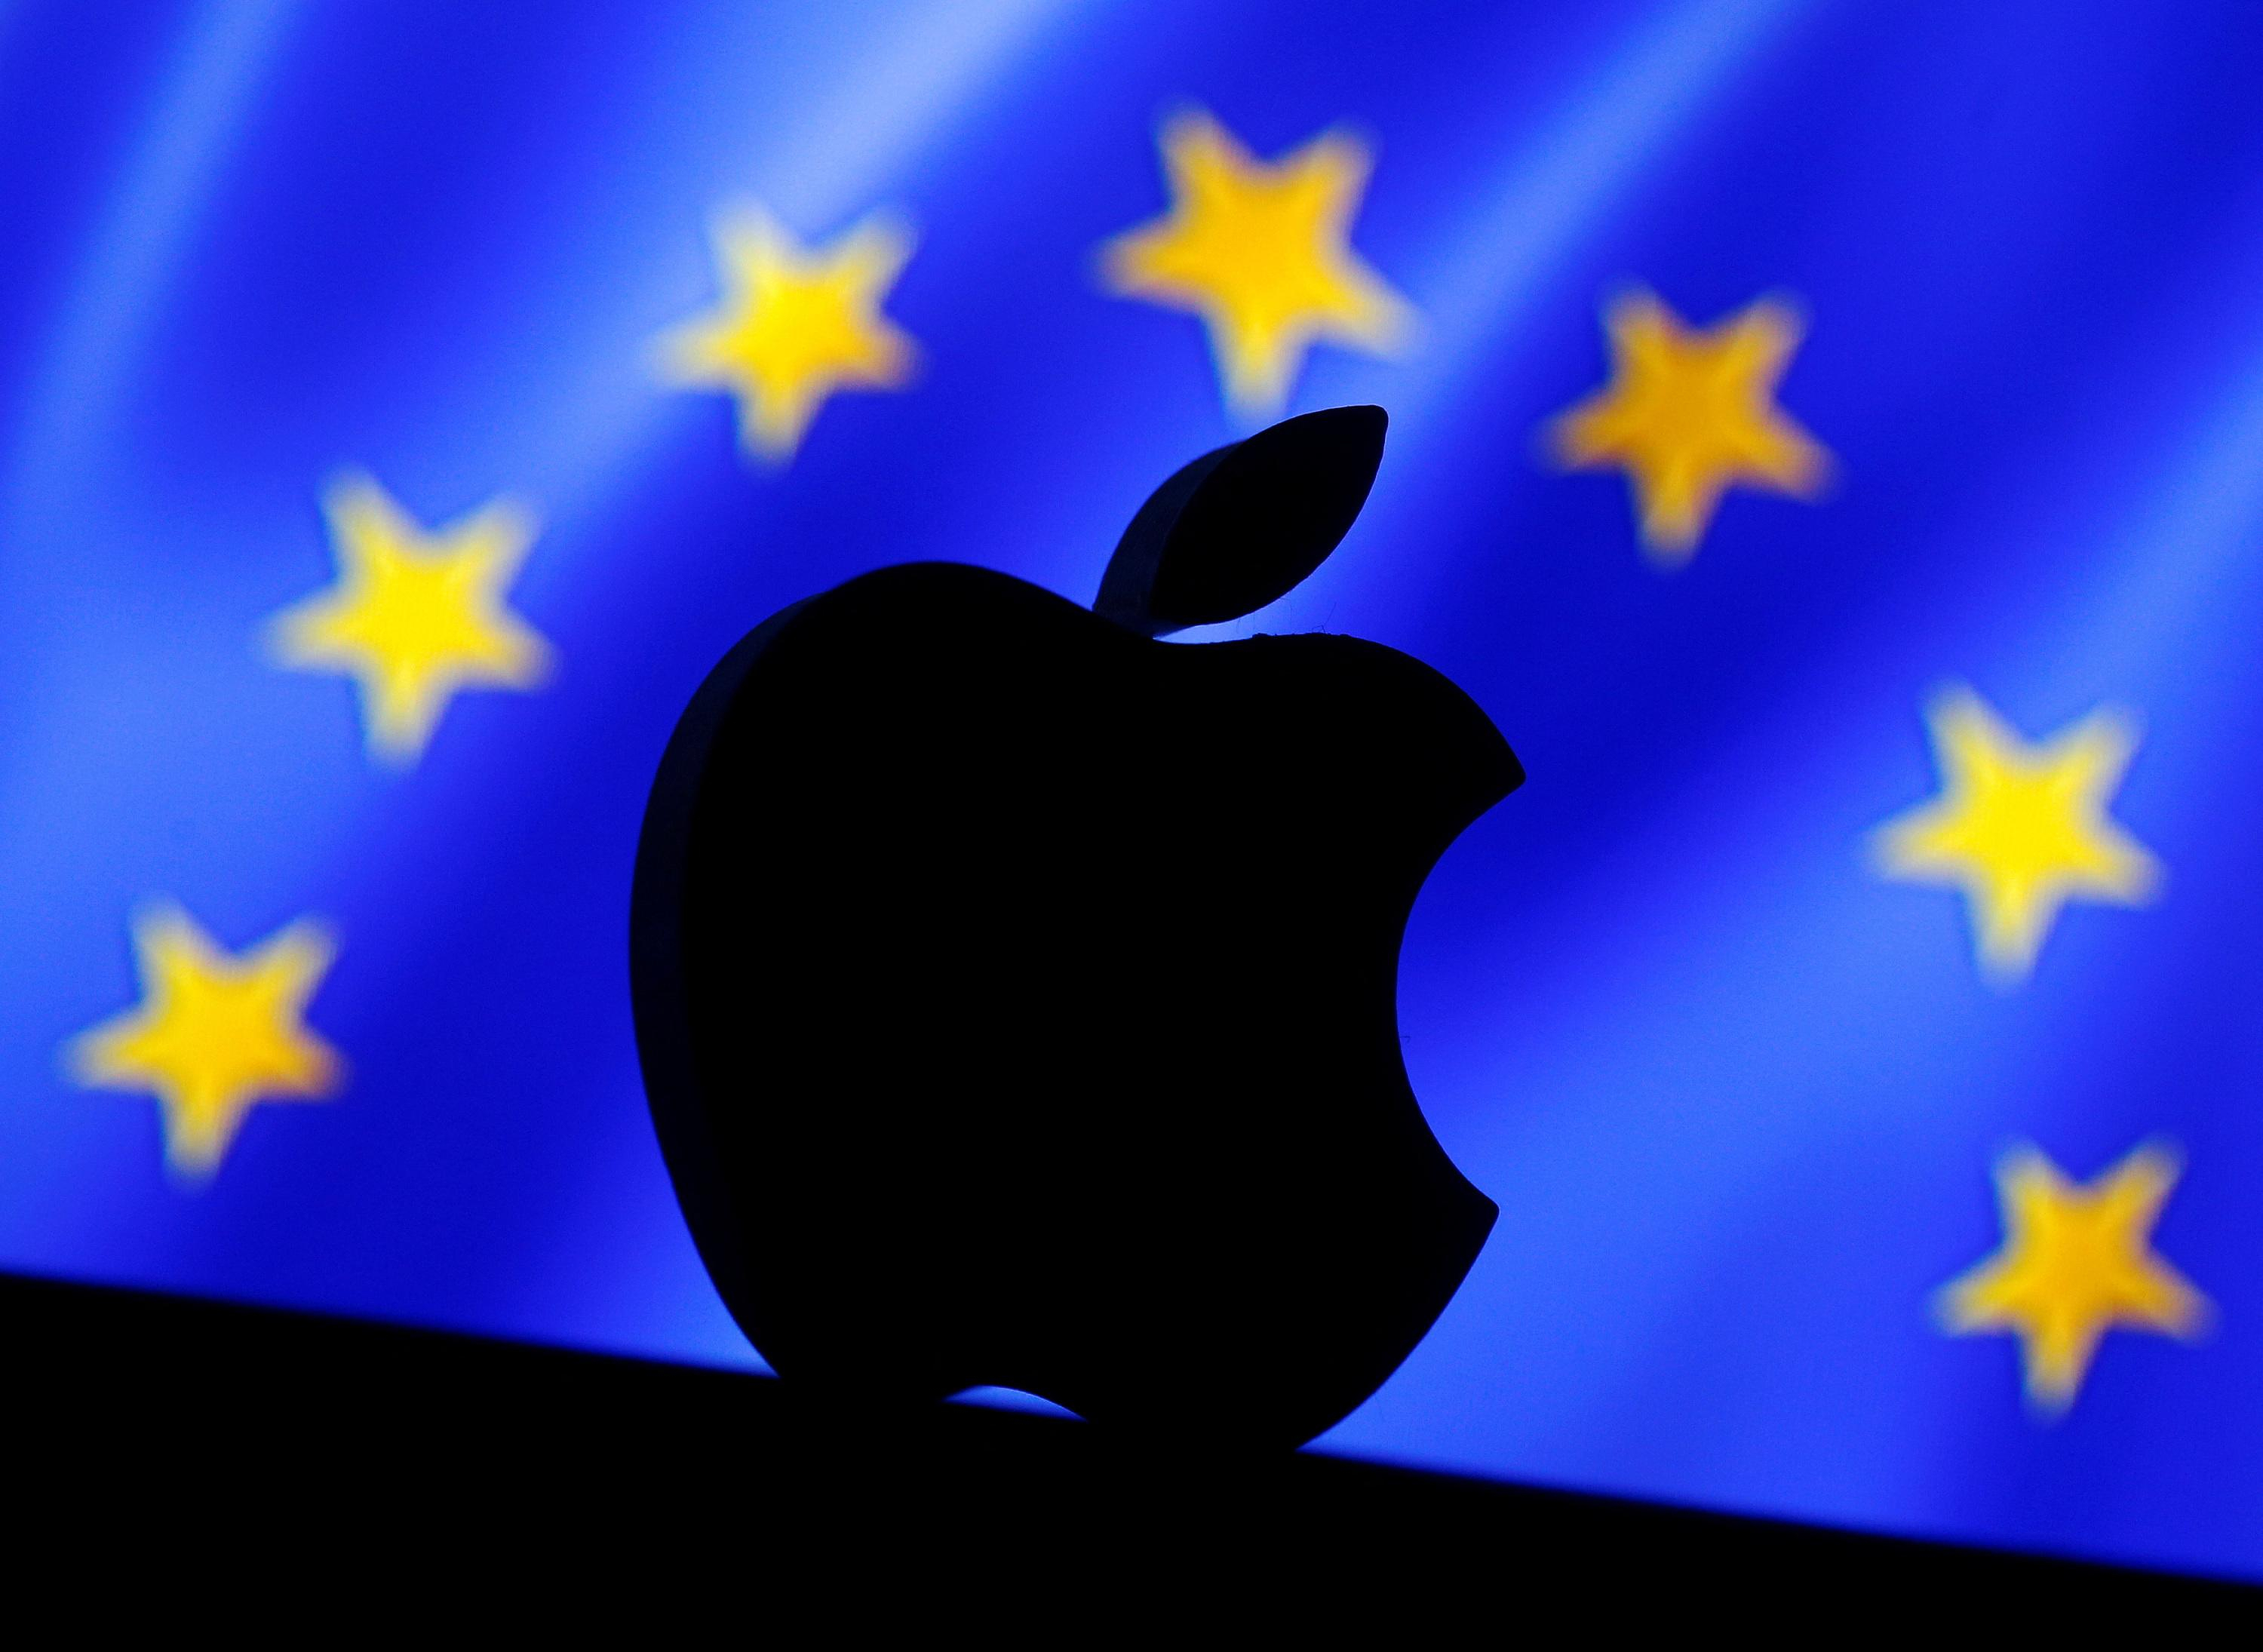 Apple soon promises more flexibility to its users in the EU